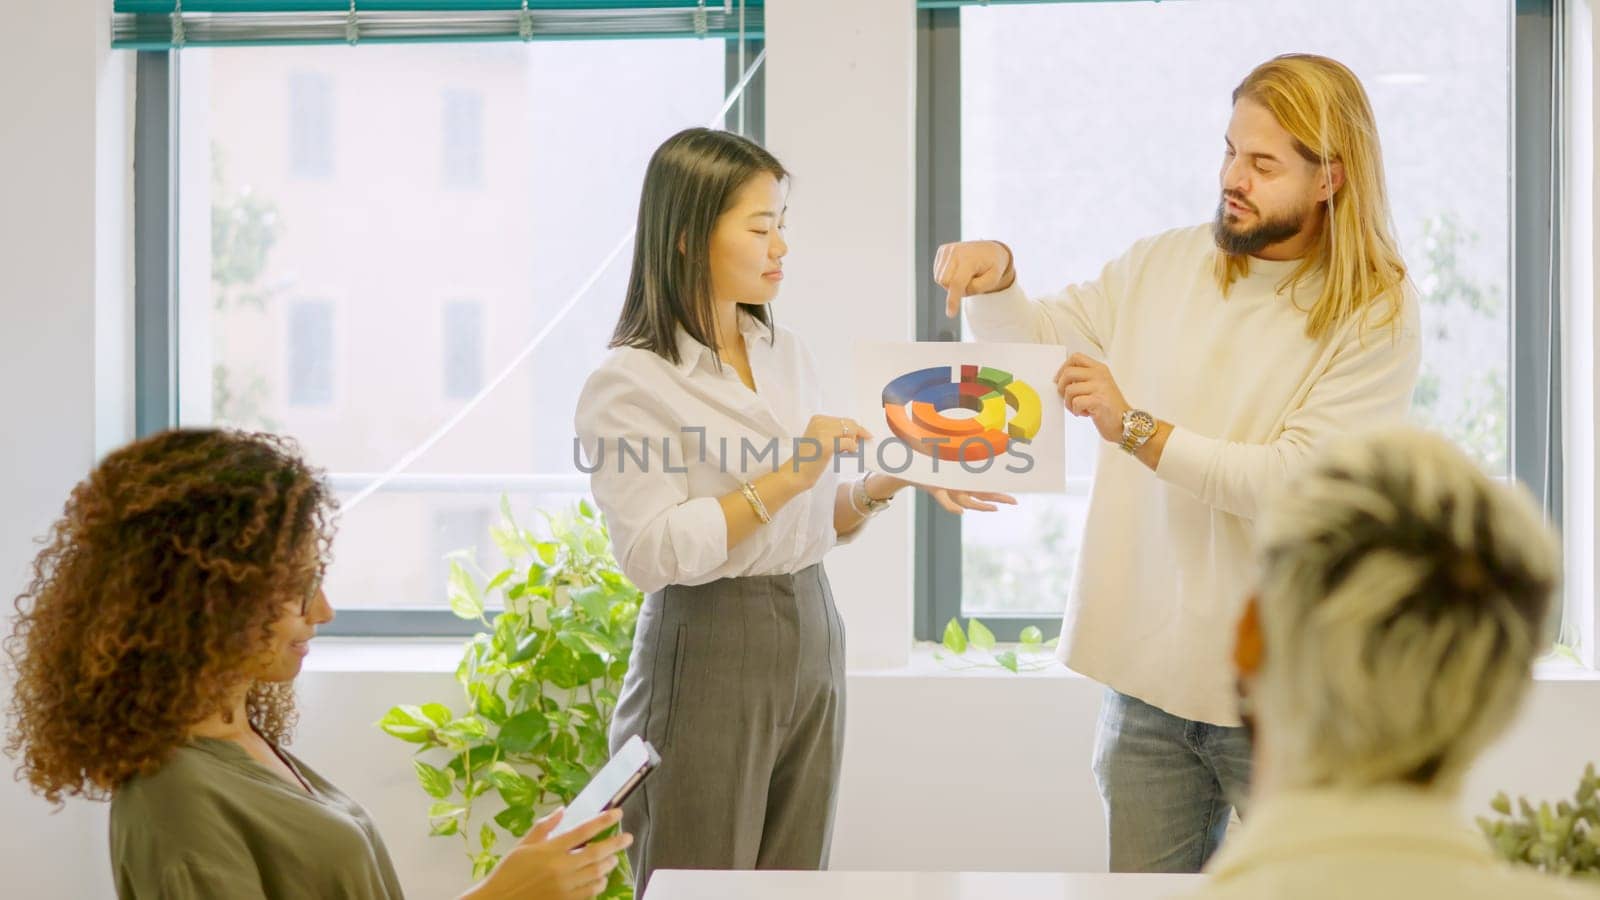 Man explaining an idea using a graphic during a multi-ethnic meeting in a coworking space